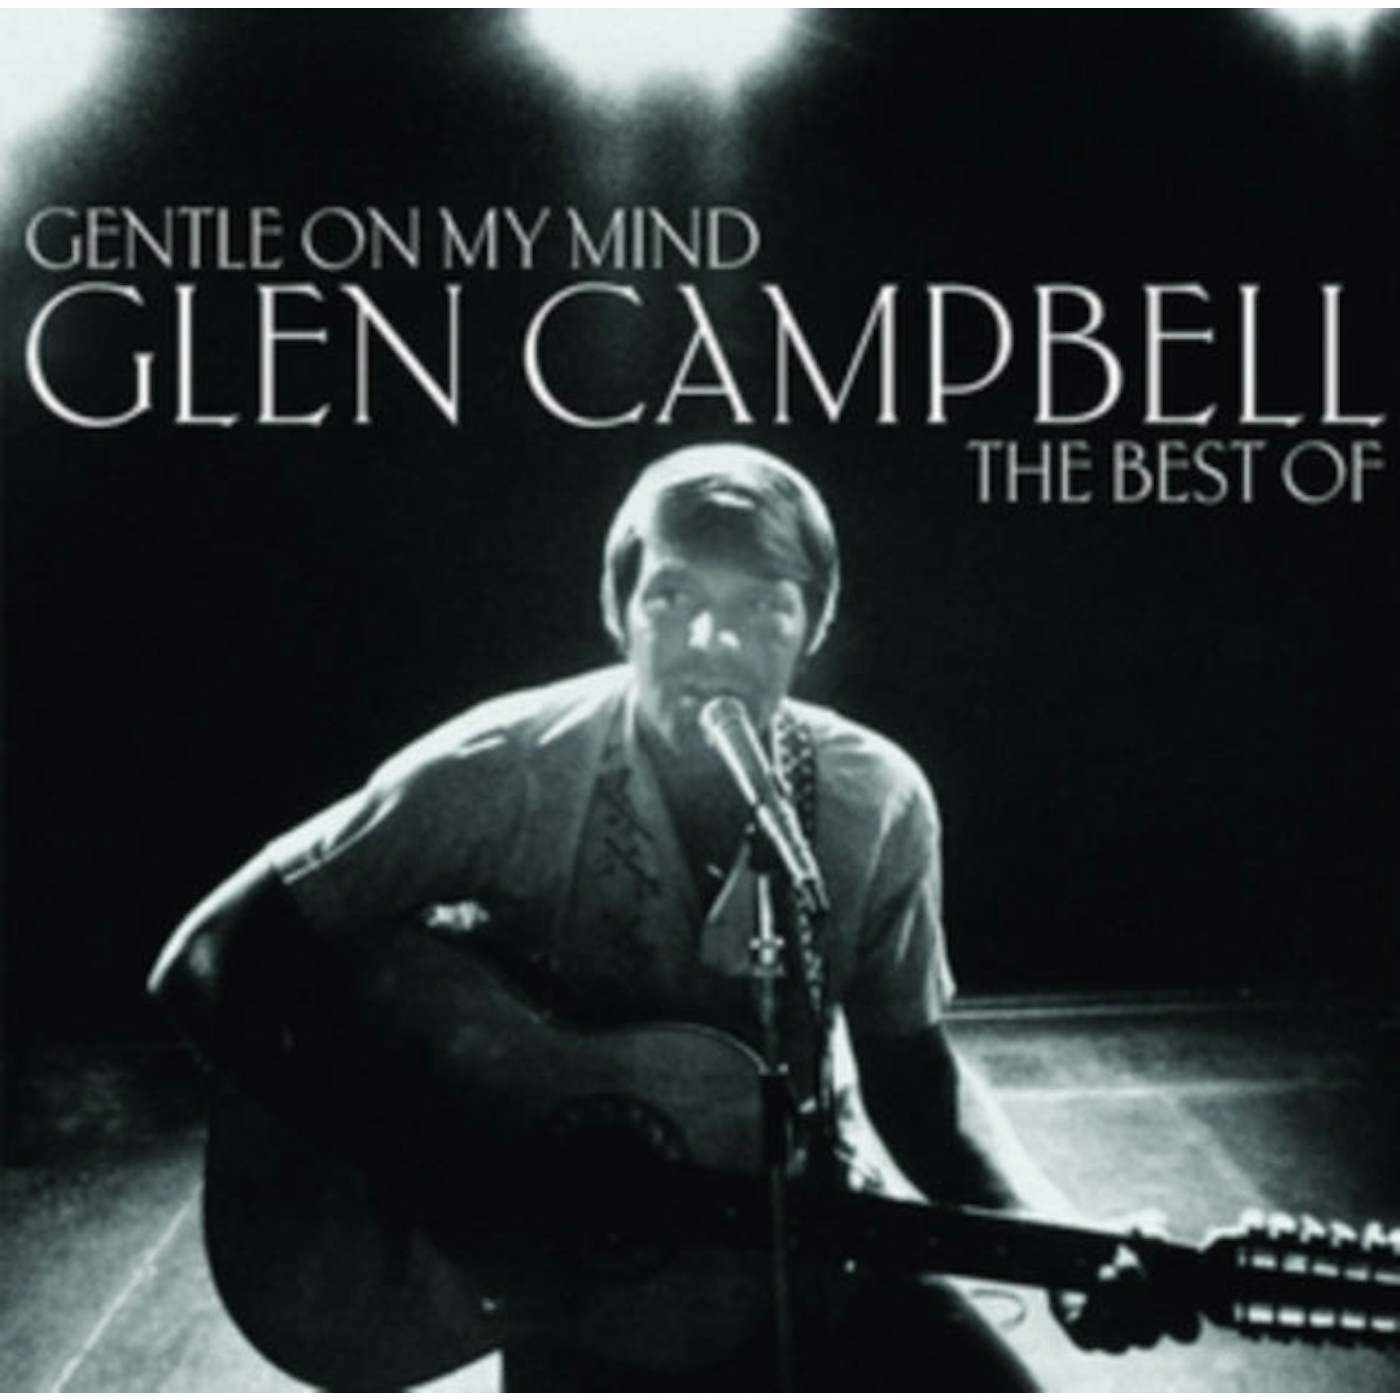 Glen Campbell CD - Gentle On My Mind - The Best Of